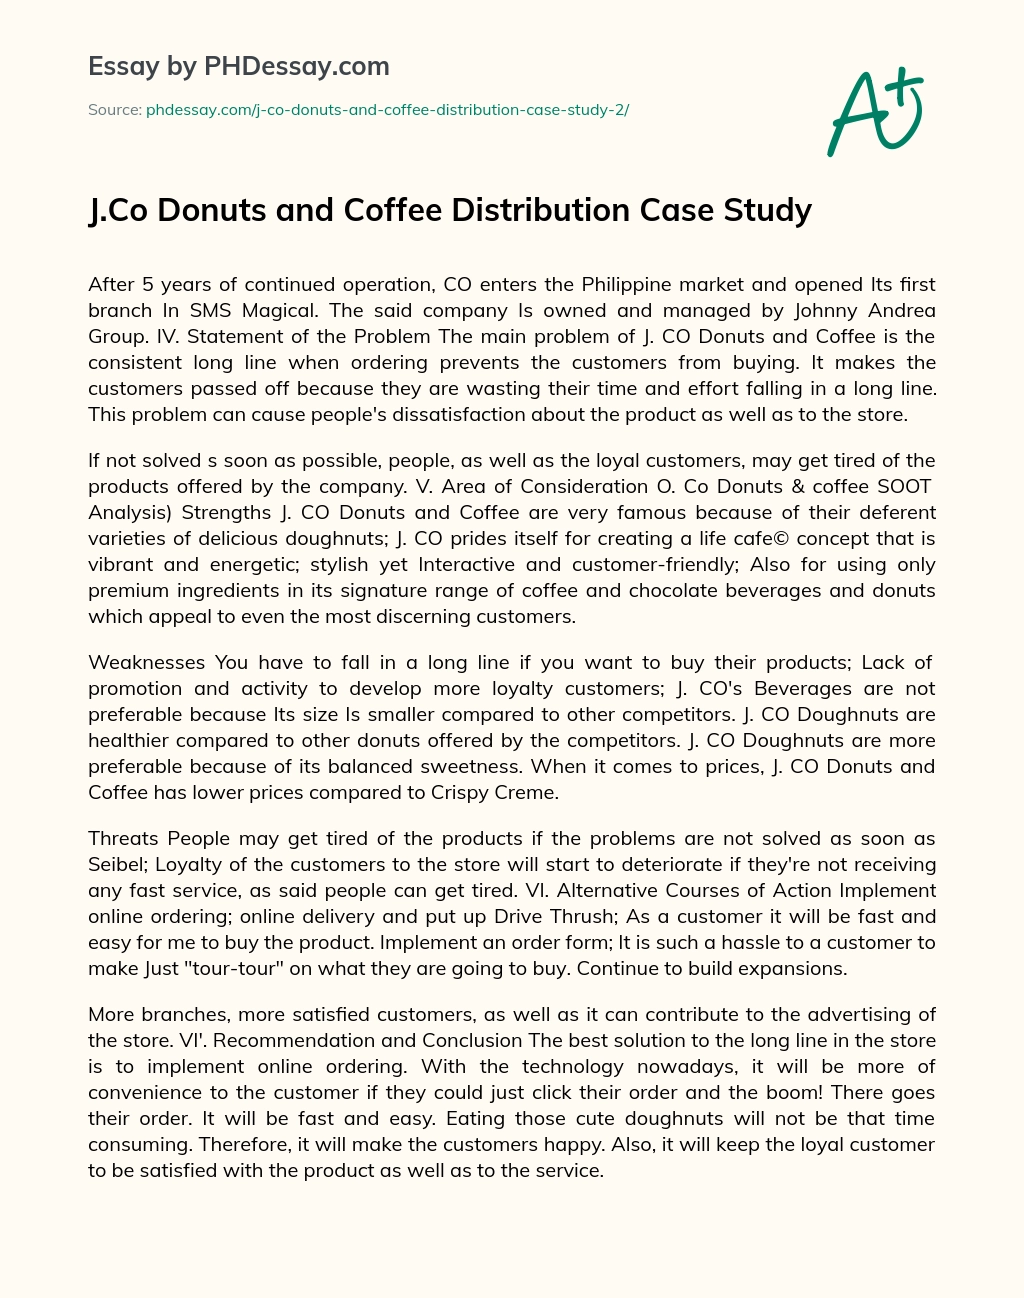 J.Co Donuts and Coffee Distribution Case Study essay